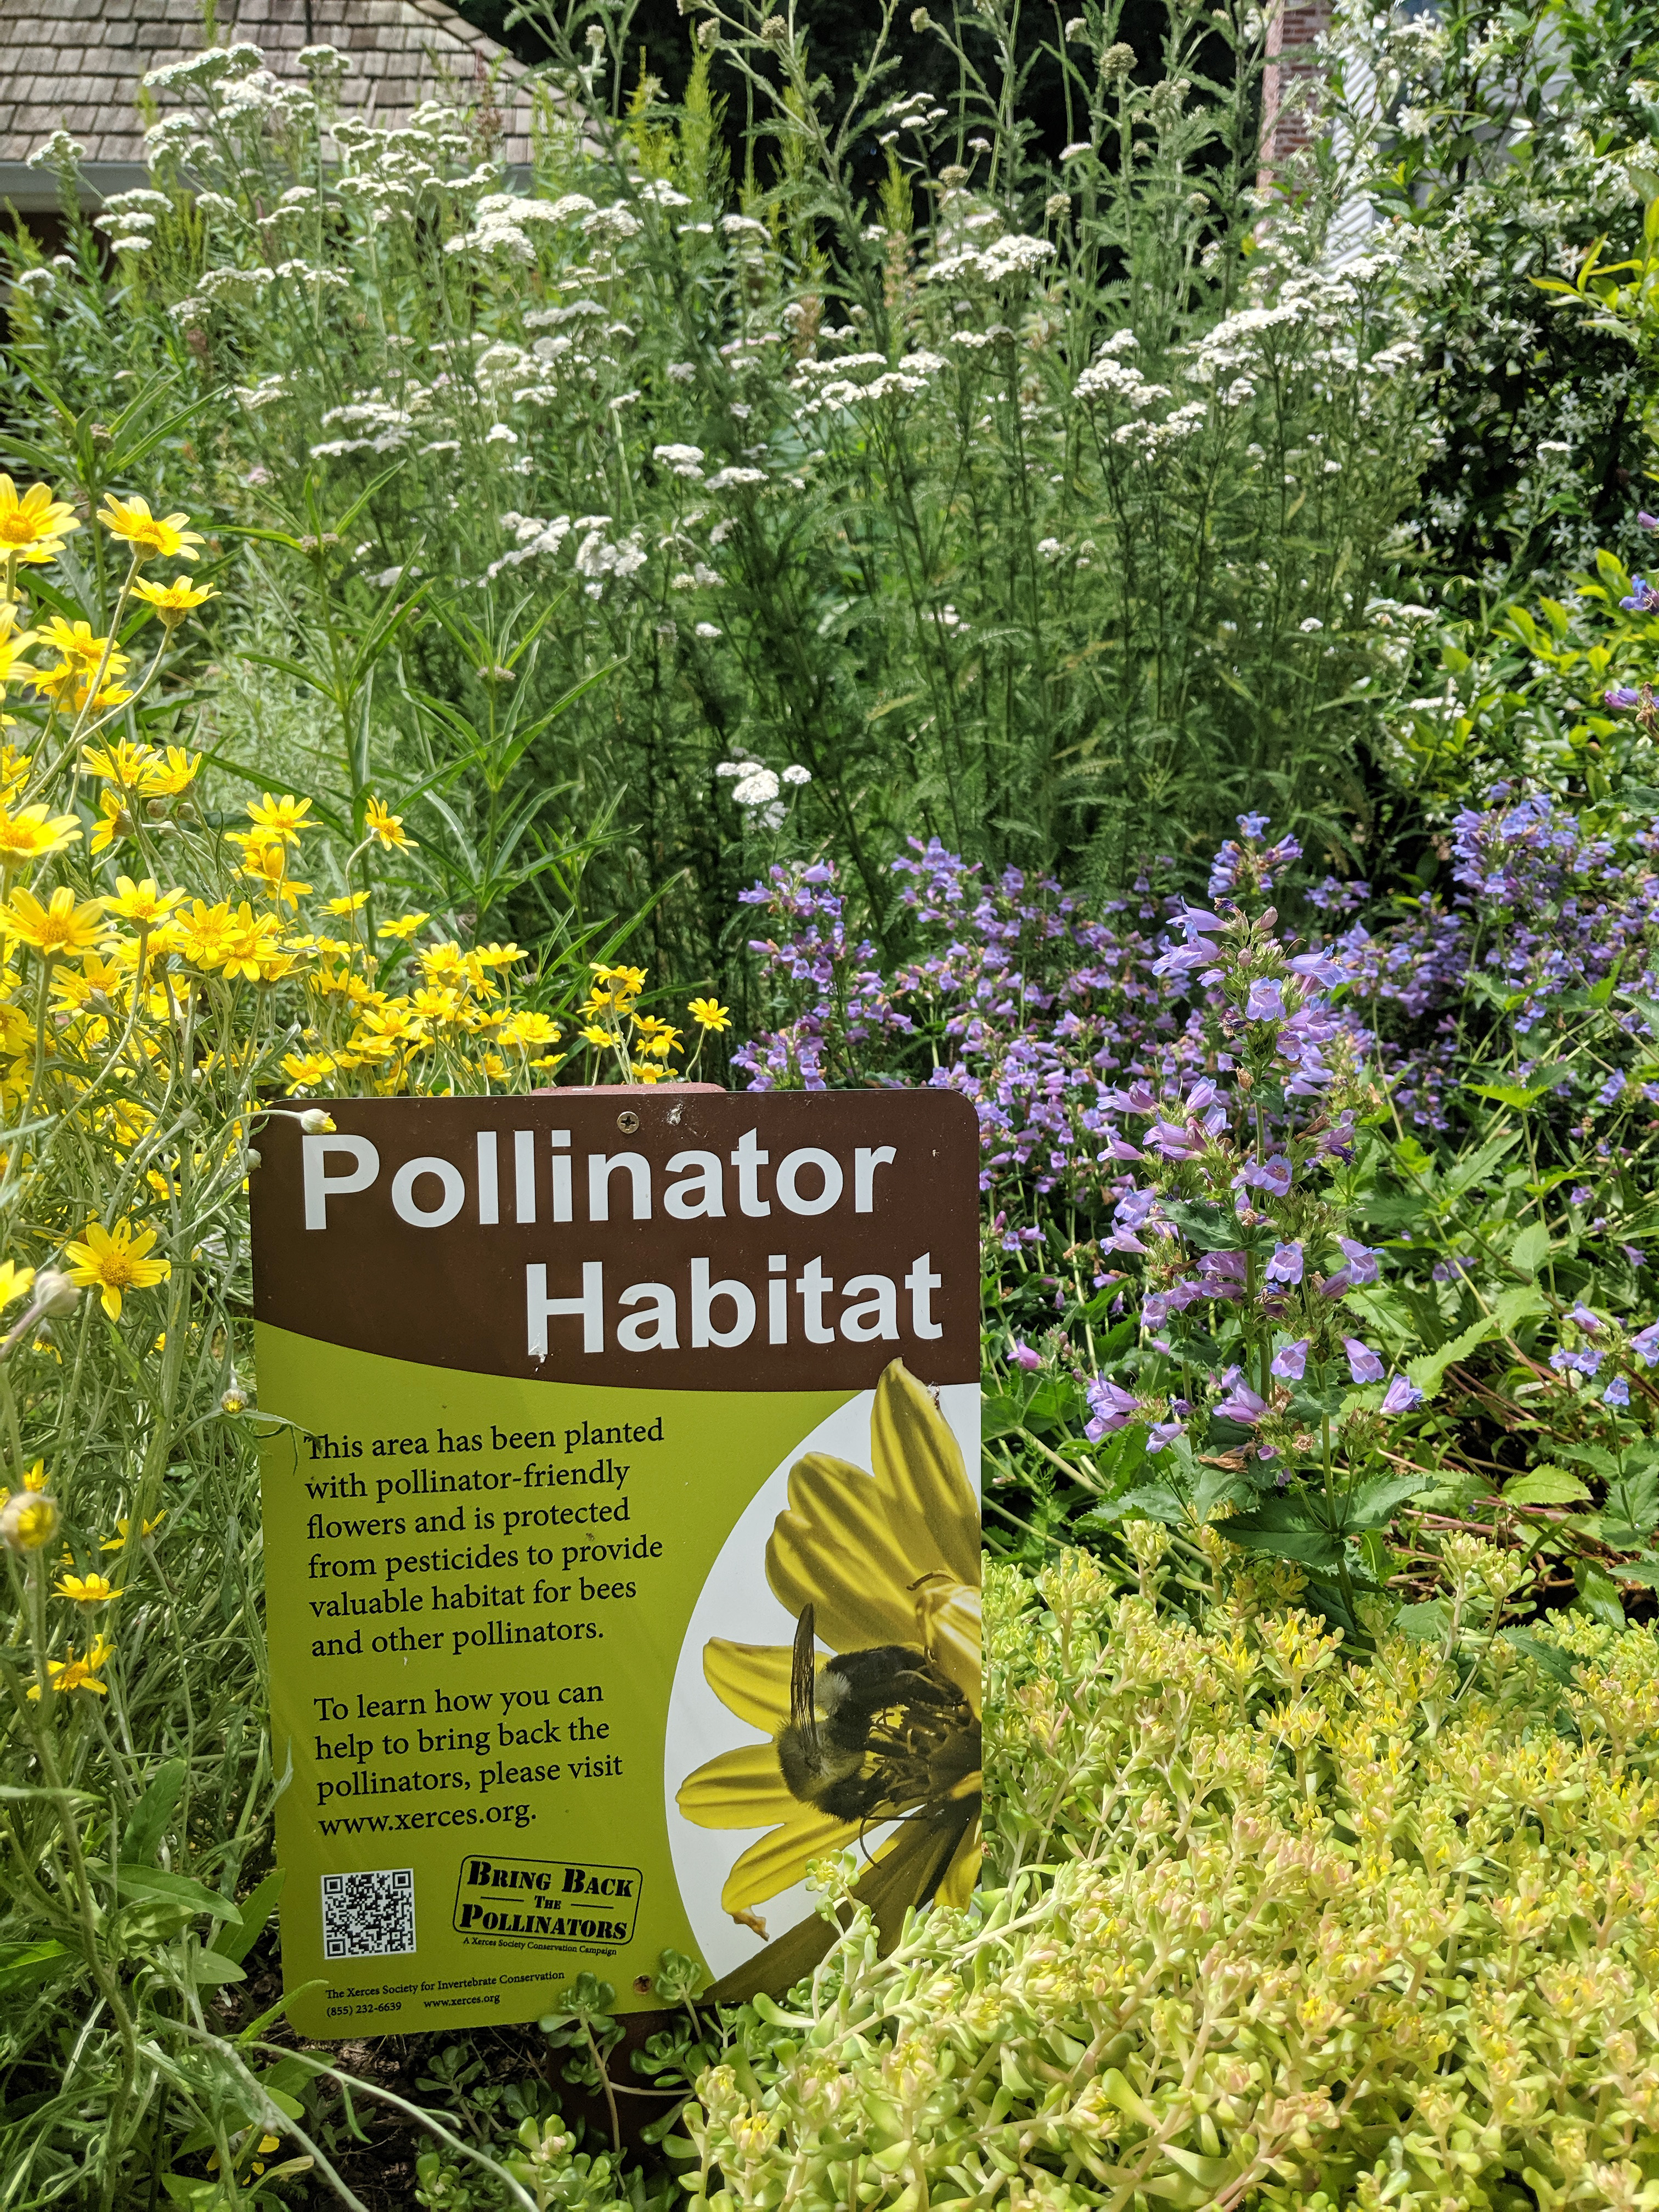 A pollinator habitat sign stands proudly among a thick collection of blossoms, mostly yellow, white, and purple.